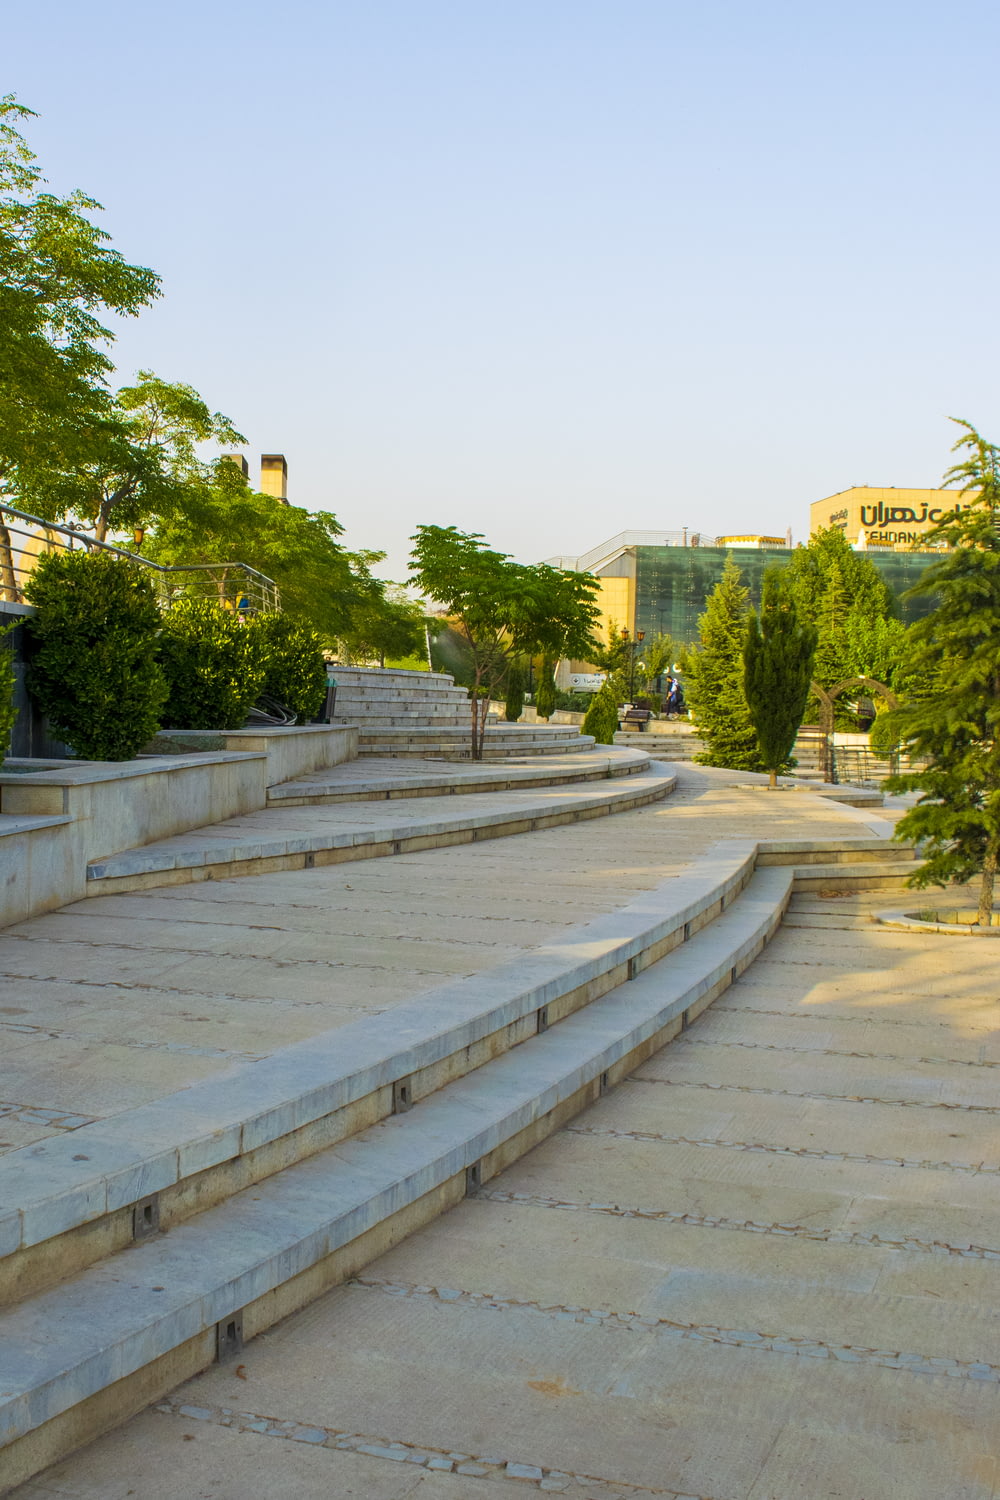 a stone walkway with trees and buildings